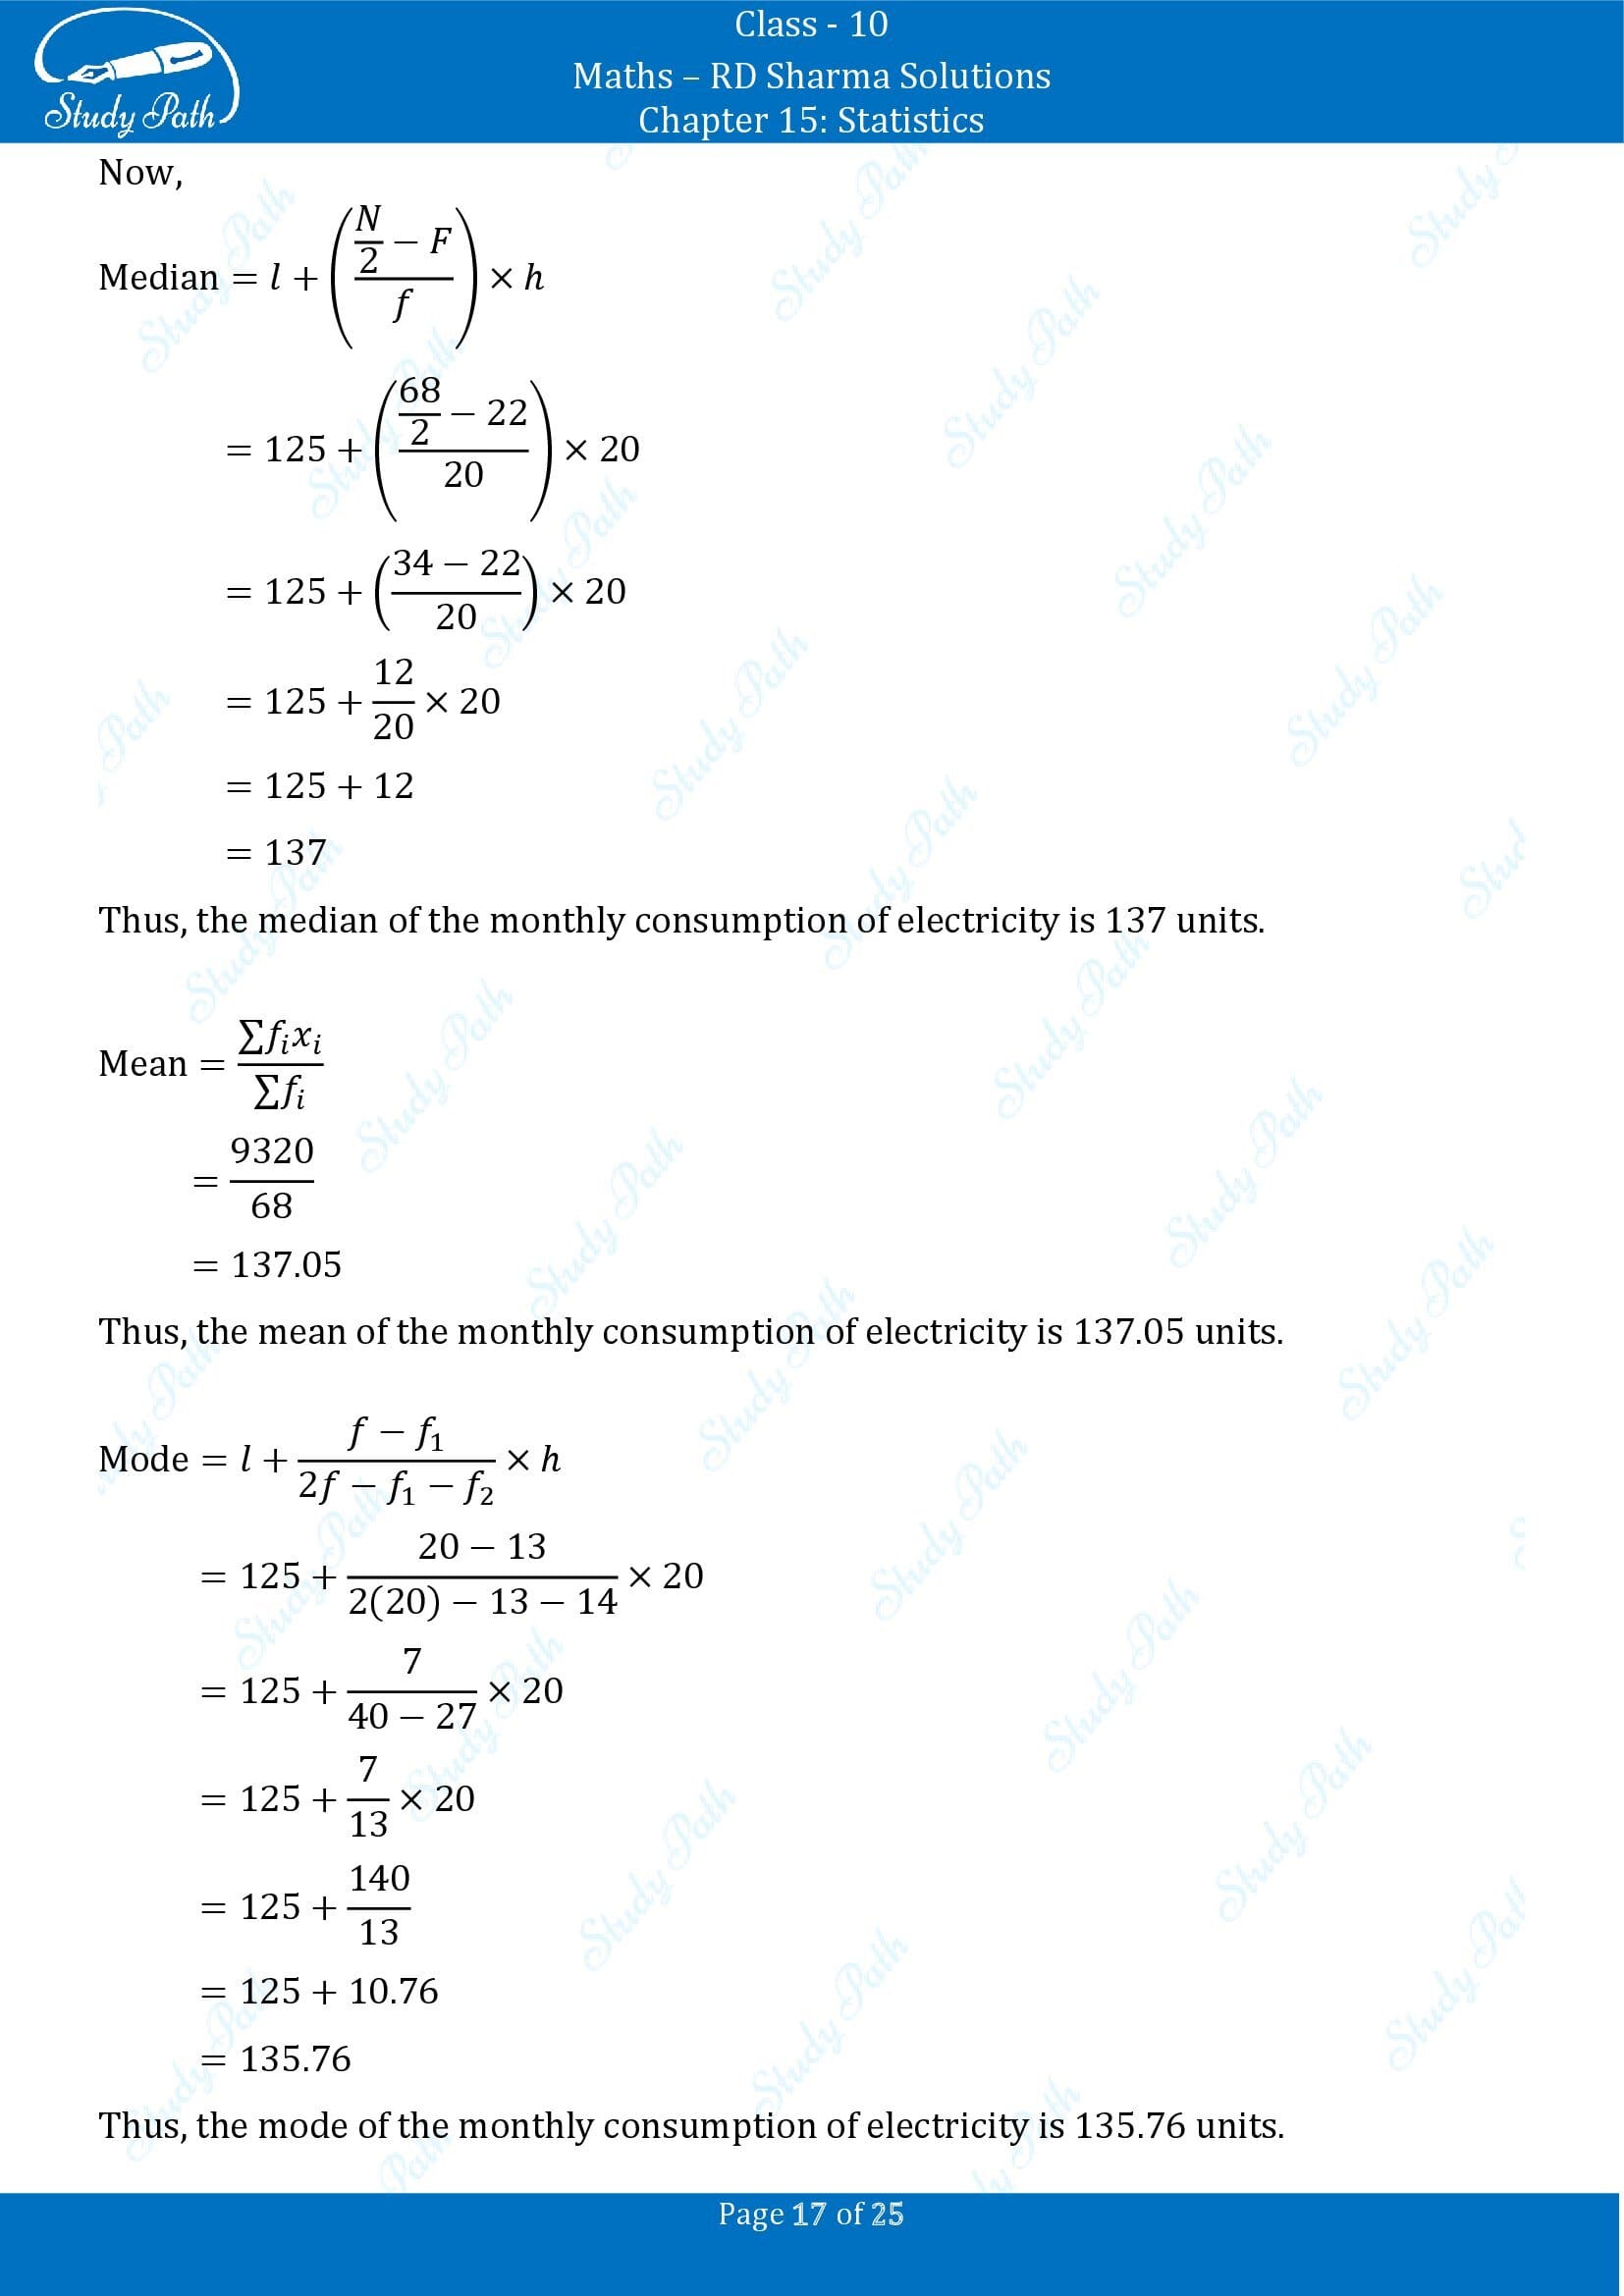 RD Sharma Solutions Class 10 Chapter 15 Statistics Exercise 15.5 00017